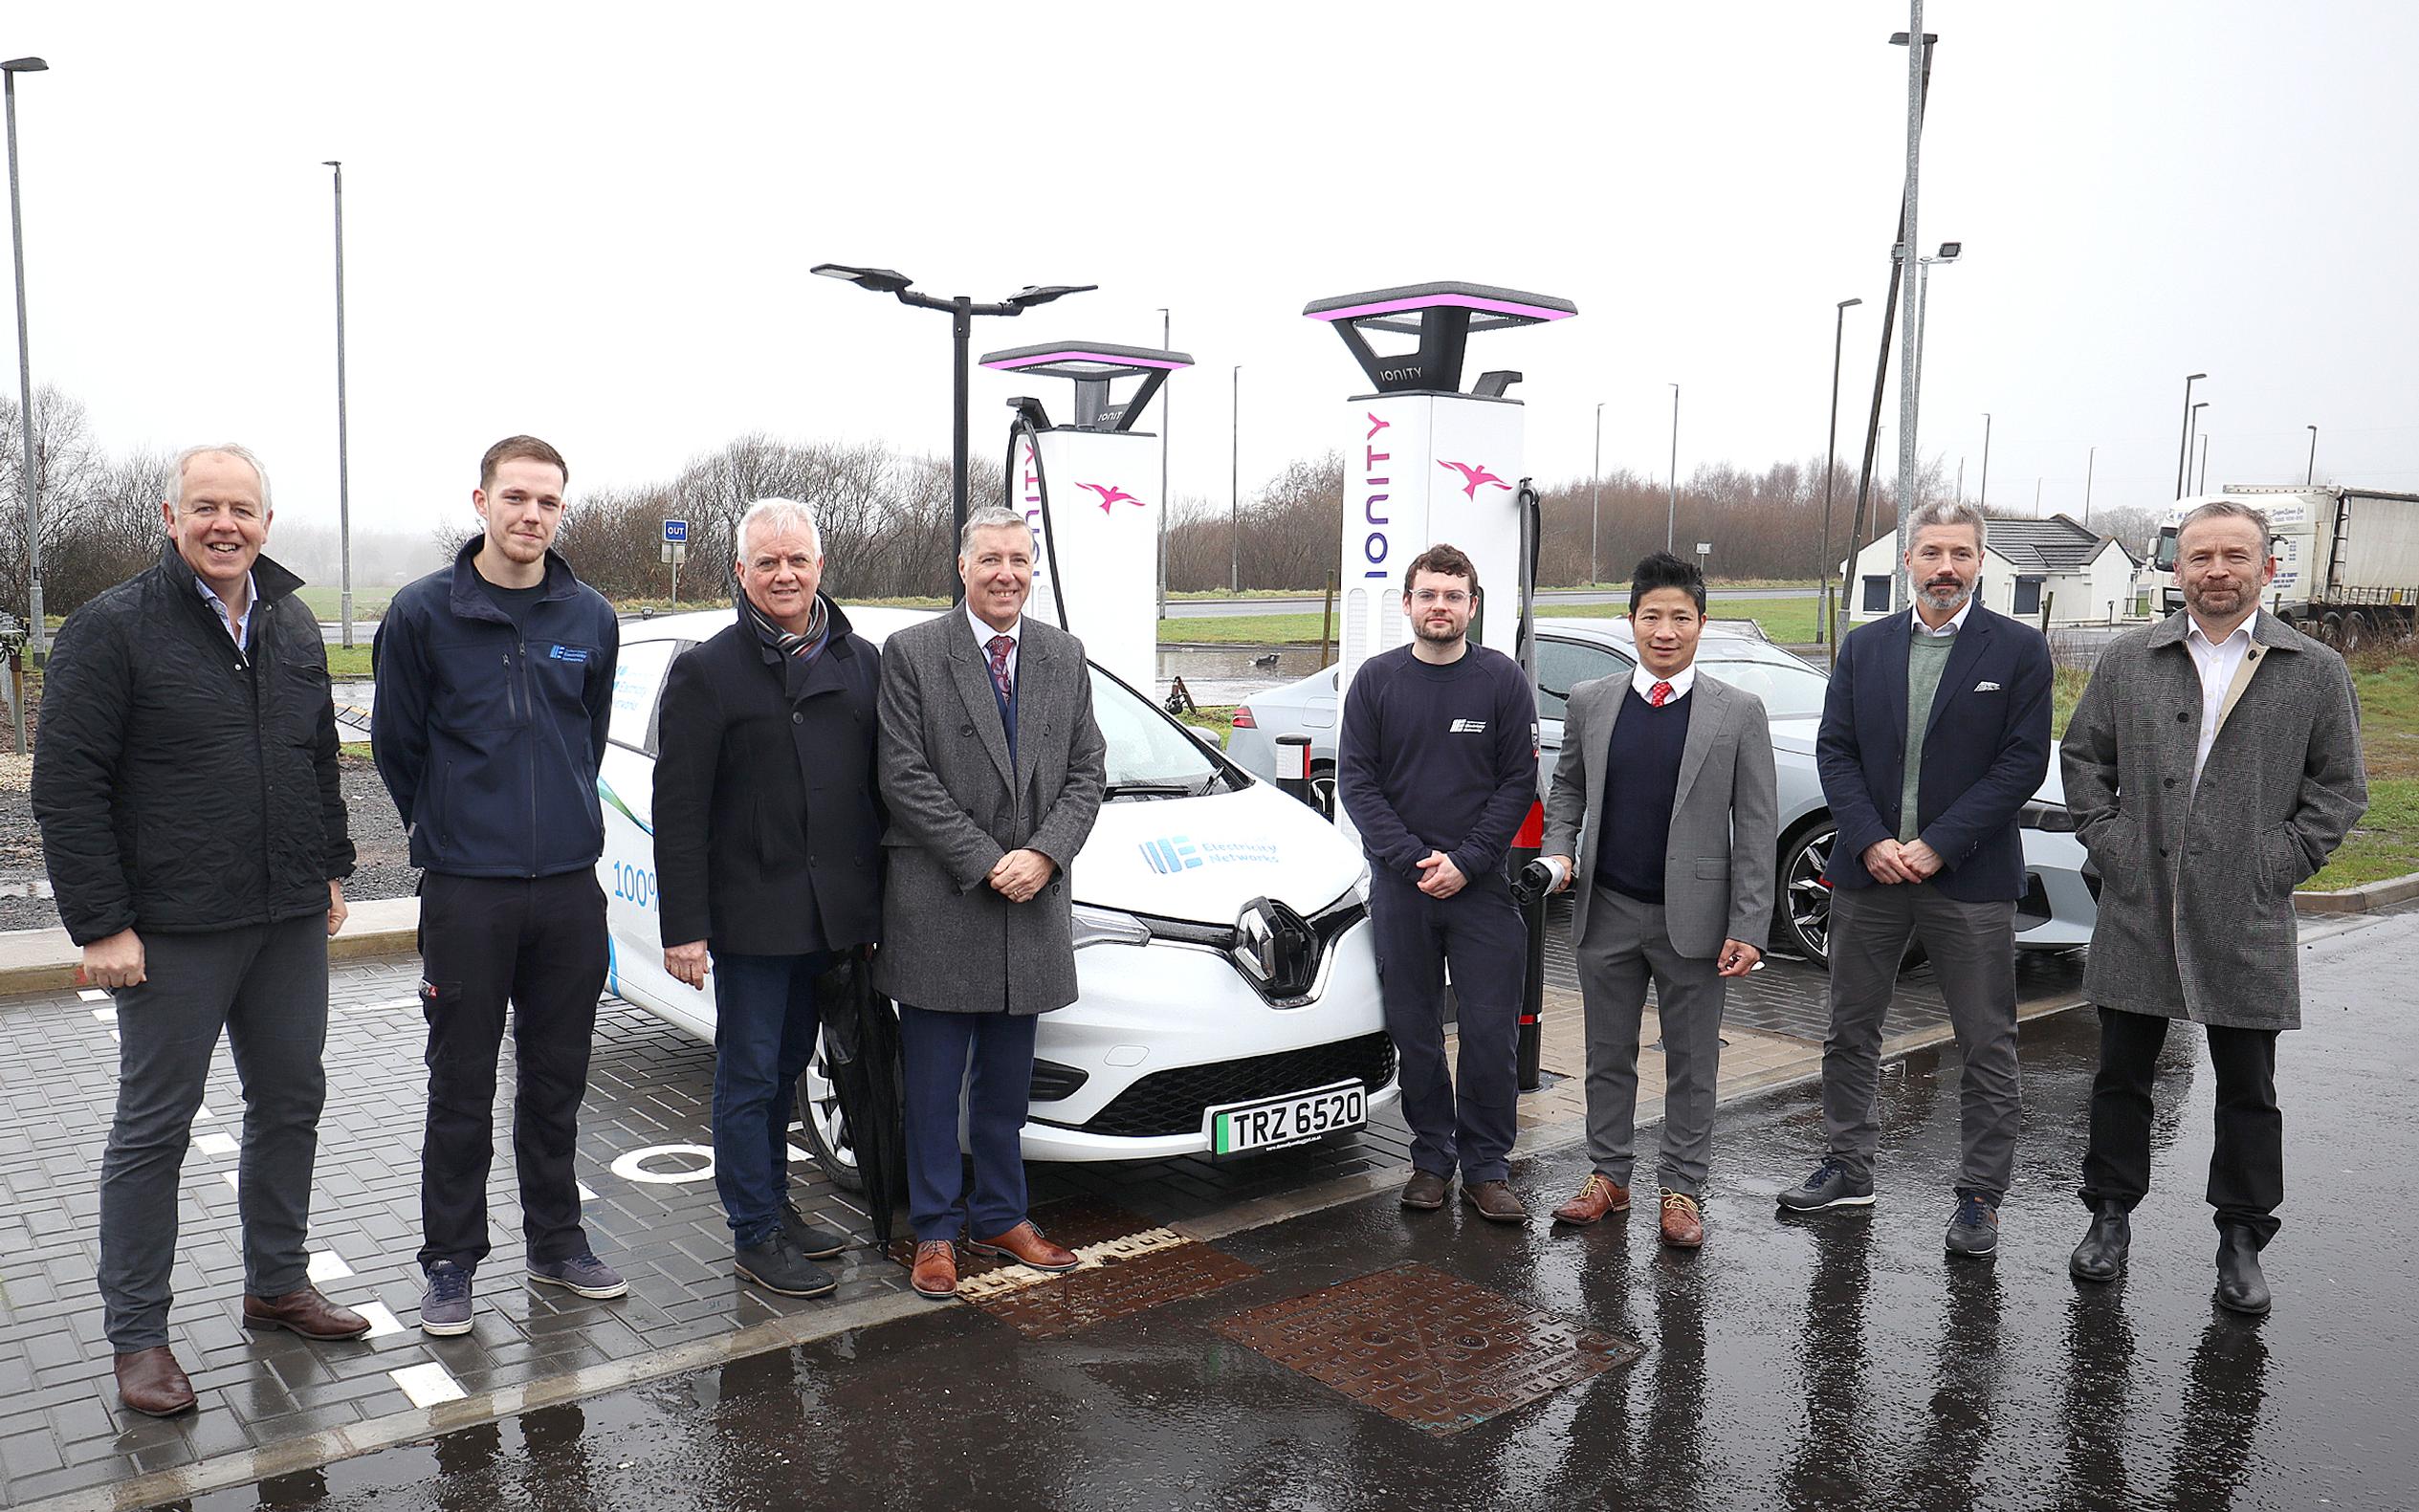 An IONITY charging hub has been opened at the Toome motorway service station in Northern Ireland